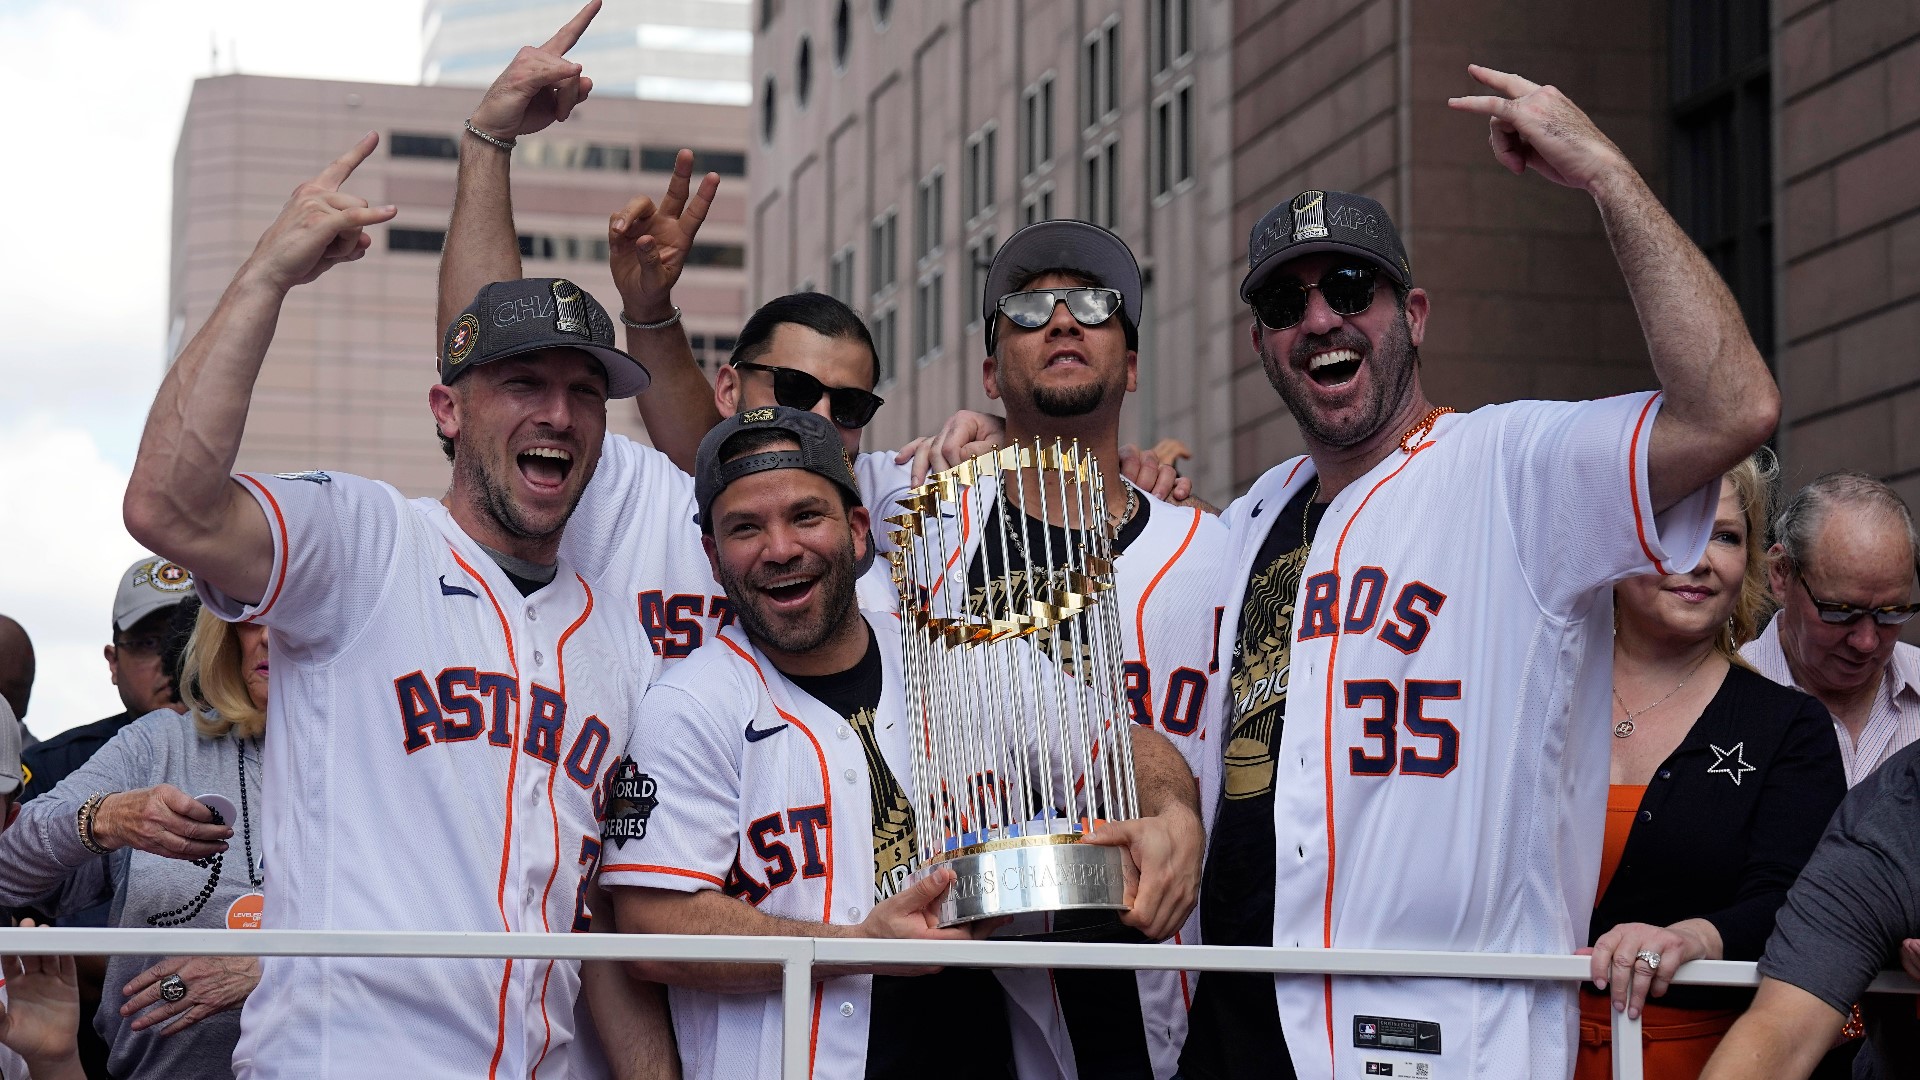 The Houston Astros are World Series champions and today, the city honored the team with a parade downtown.